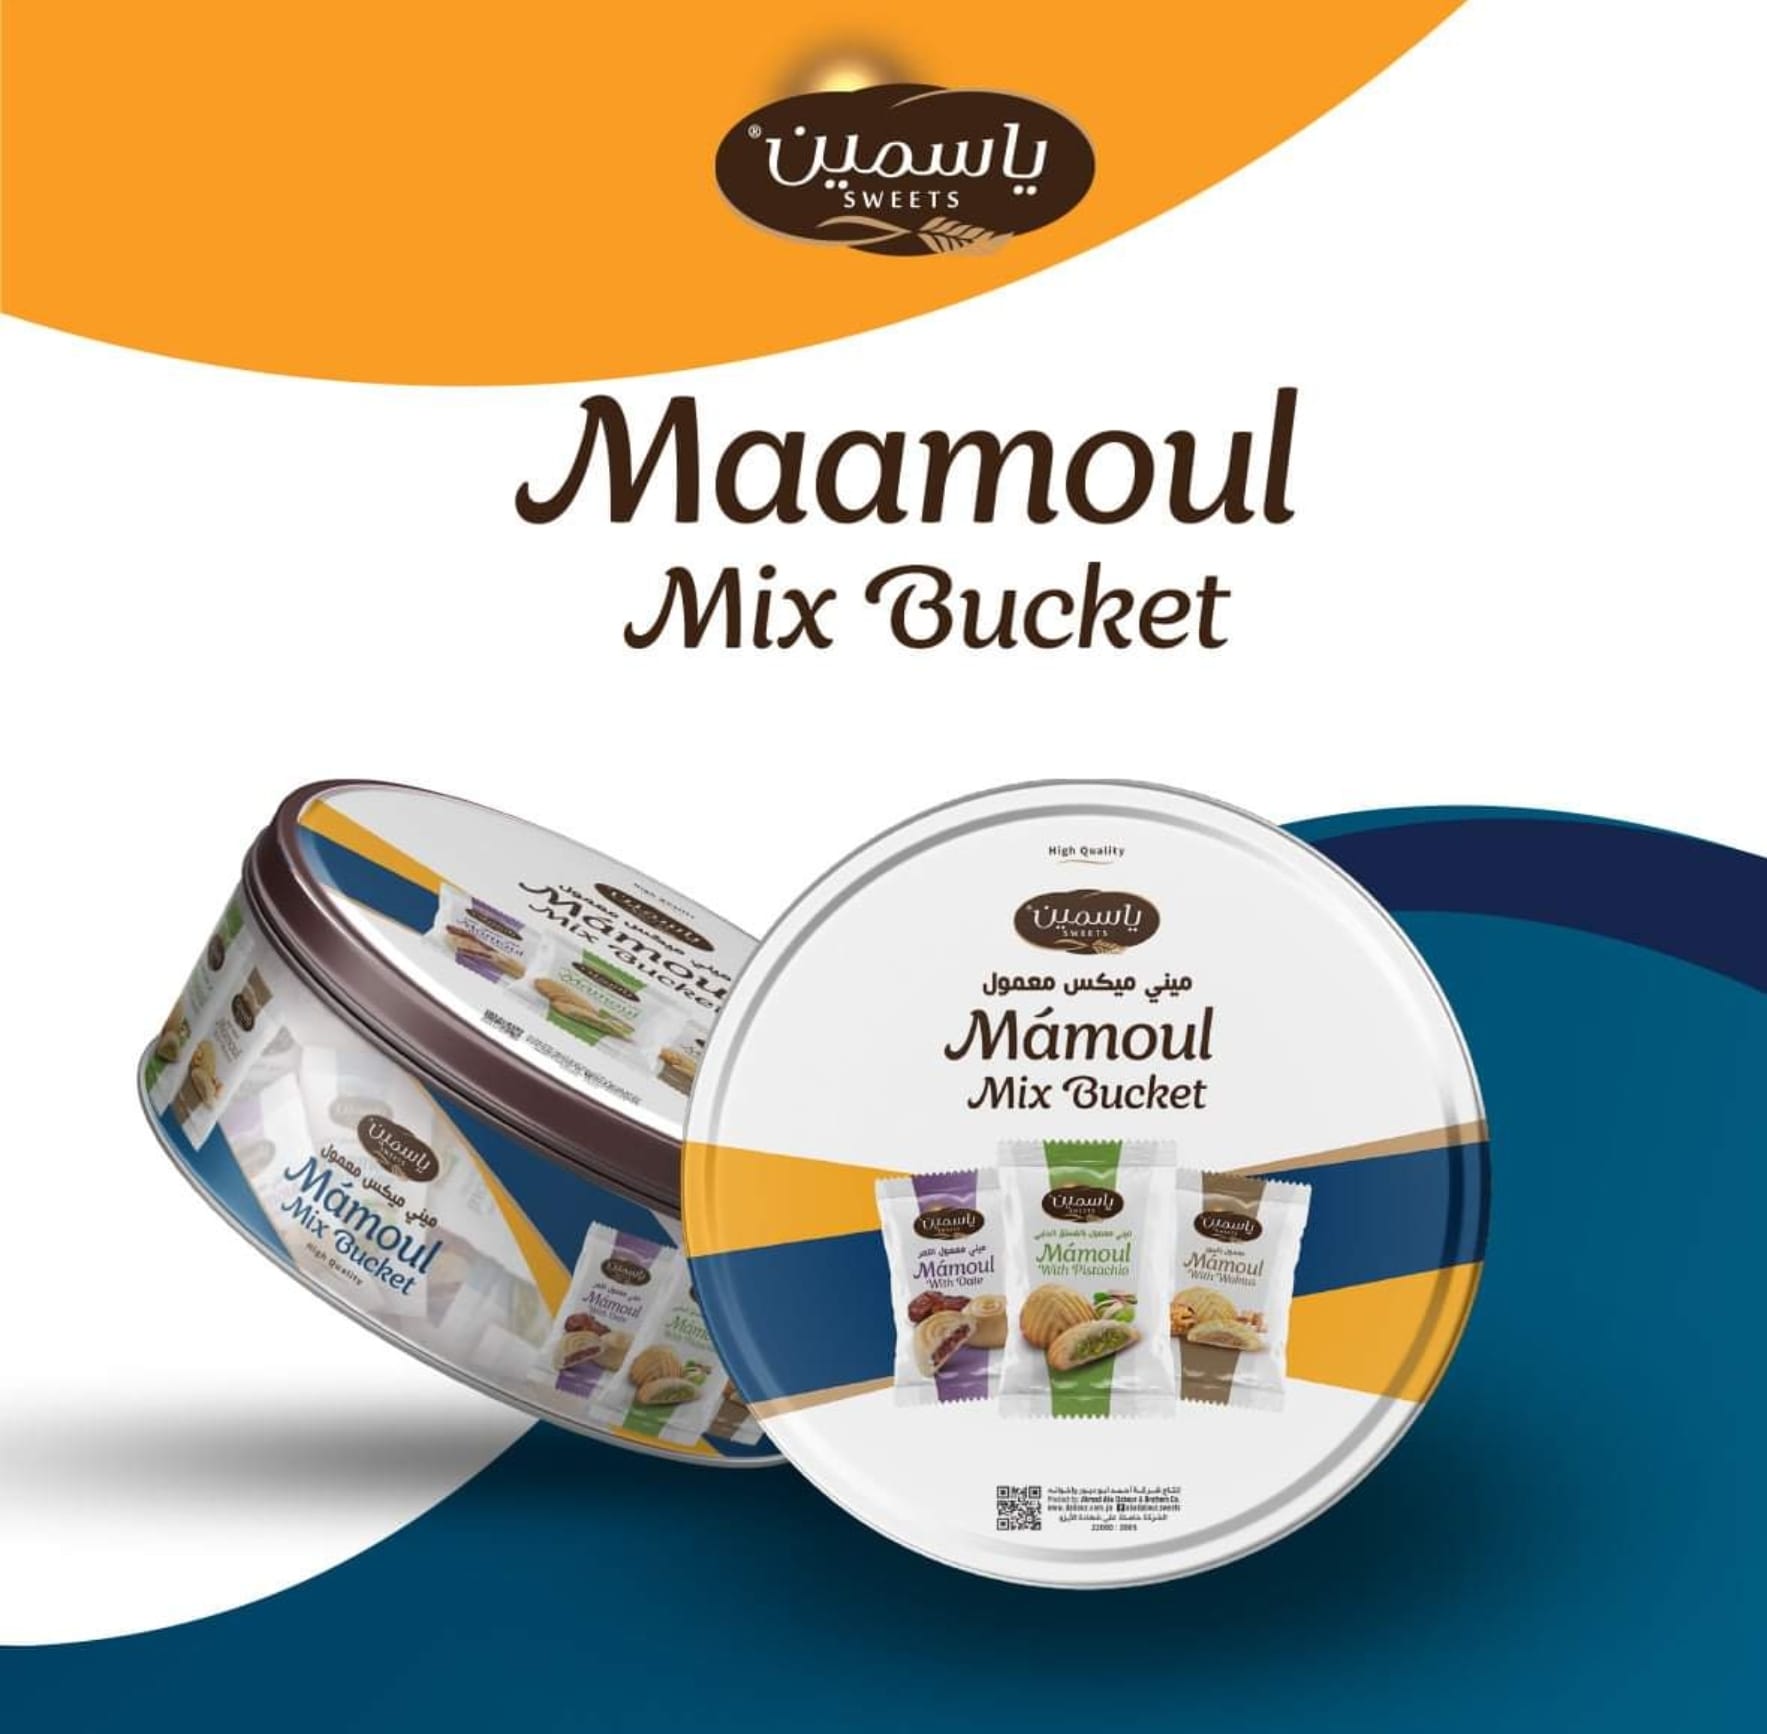 Wholesaler and distributor of Yasmeen products in calgary canada